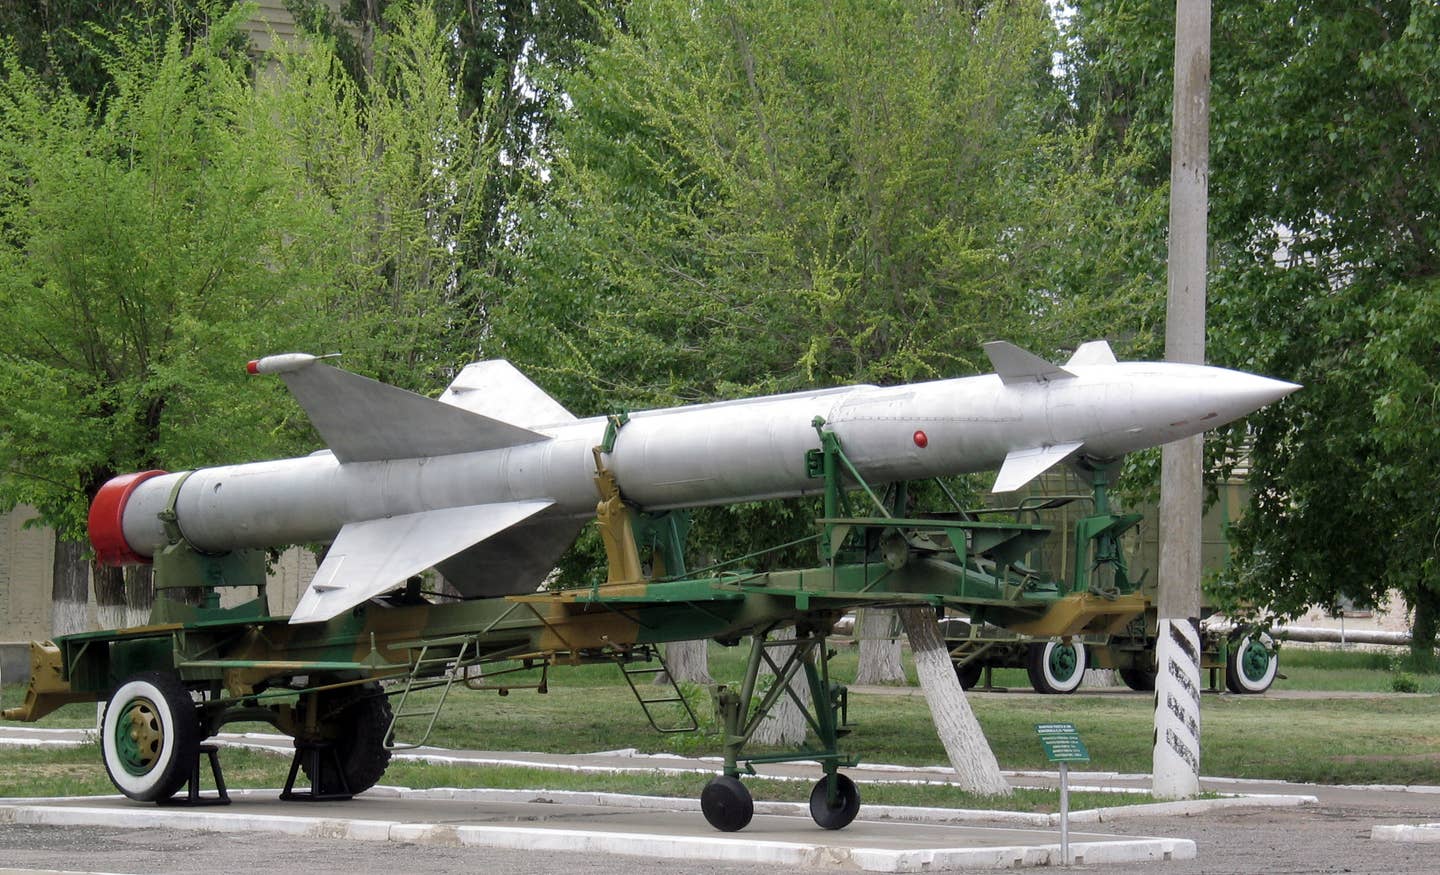 An S-25 Berkut high-altitude surface-to-air missile at the Kapustin Yar museum in Znamensk, Russia. <em>Leonidl/Wikimedia Commons</em>